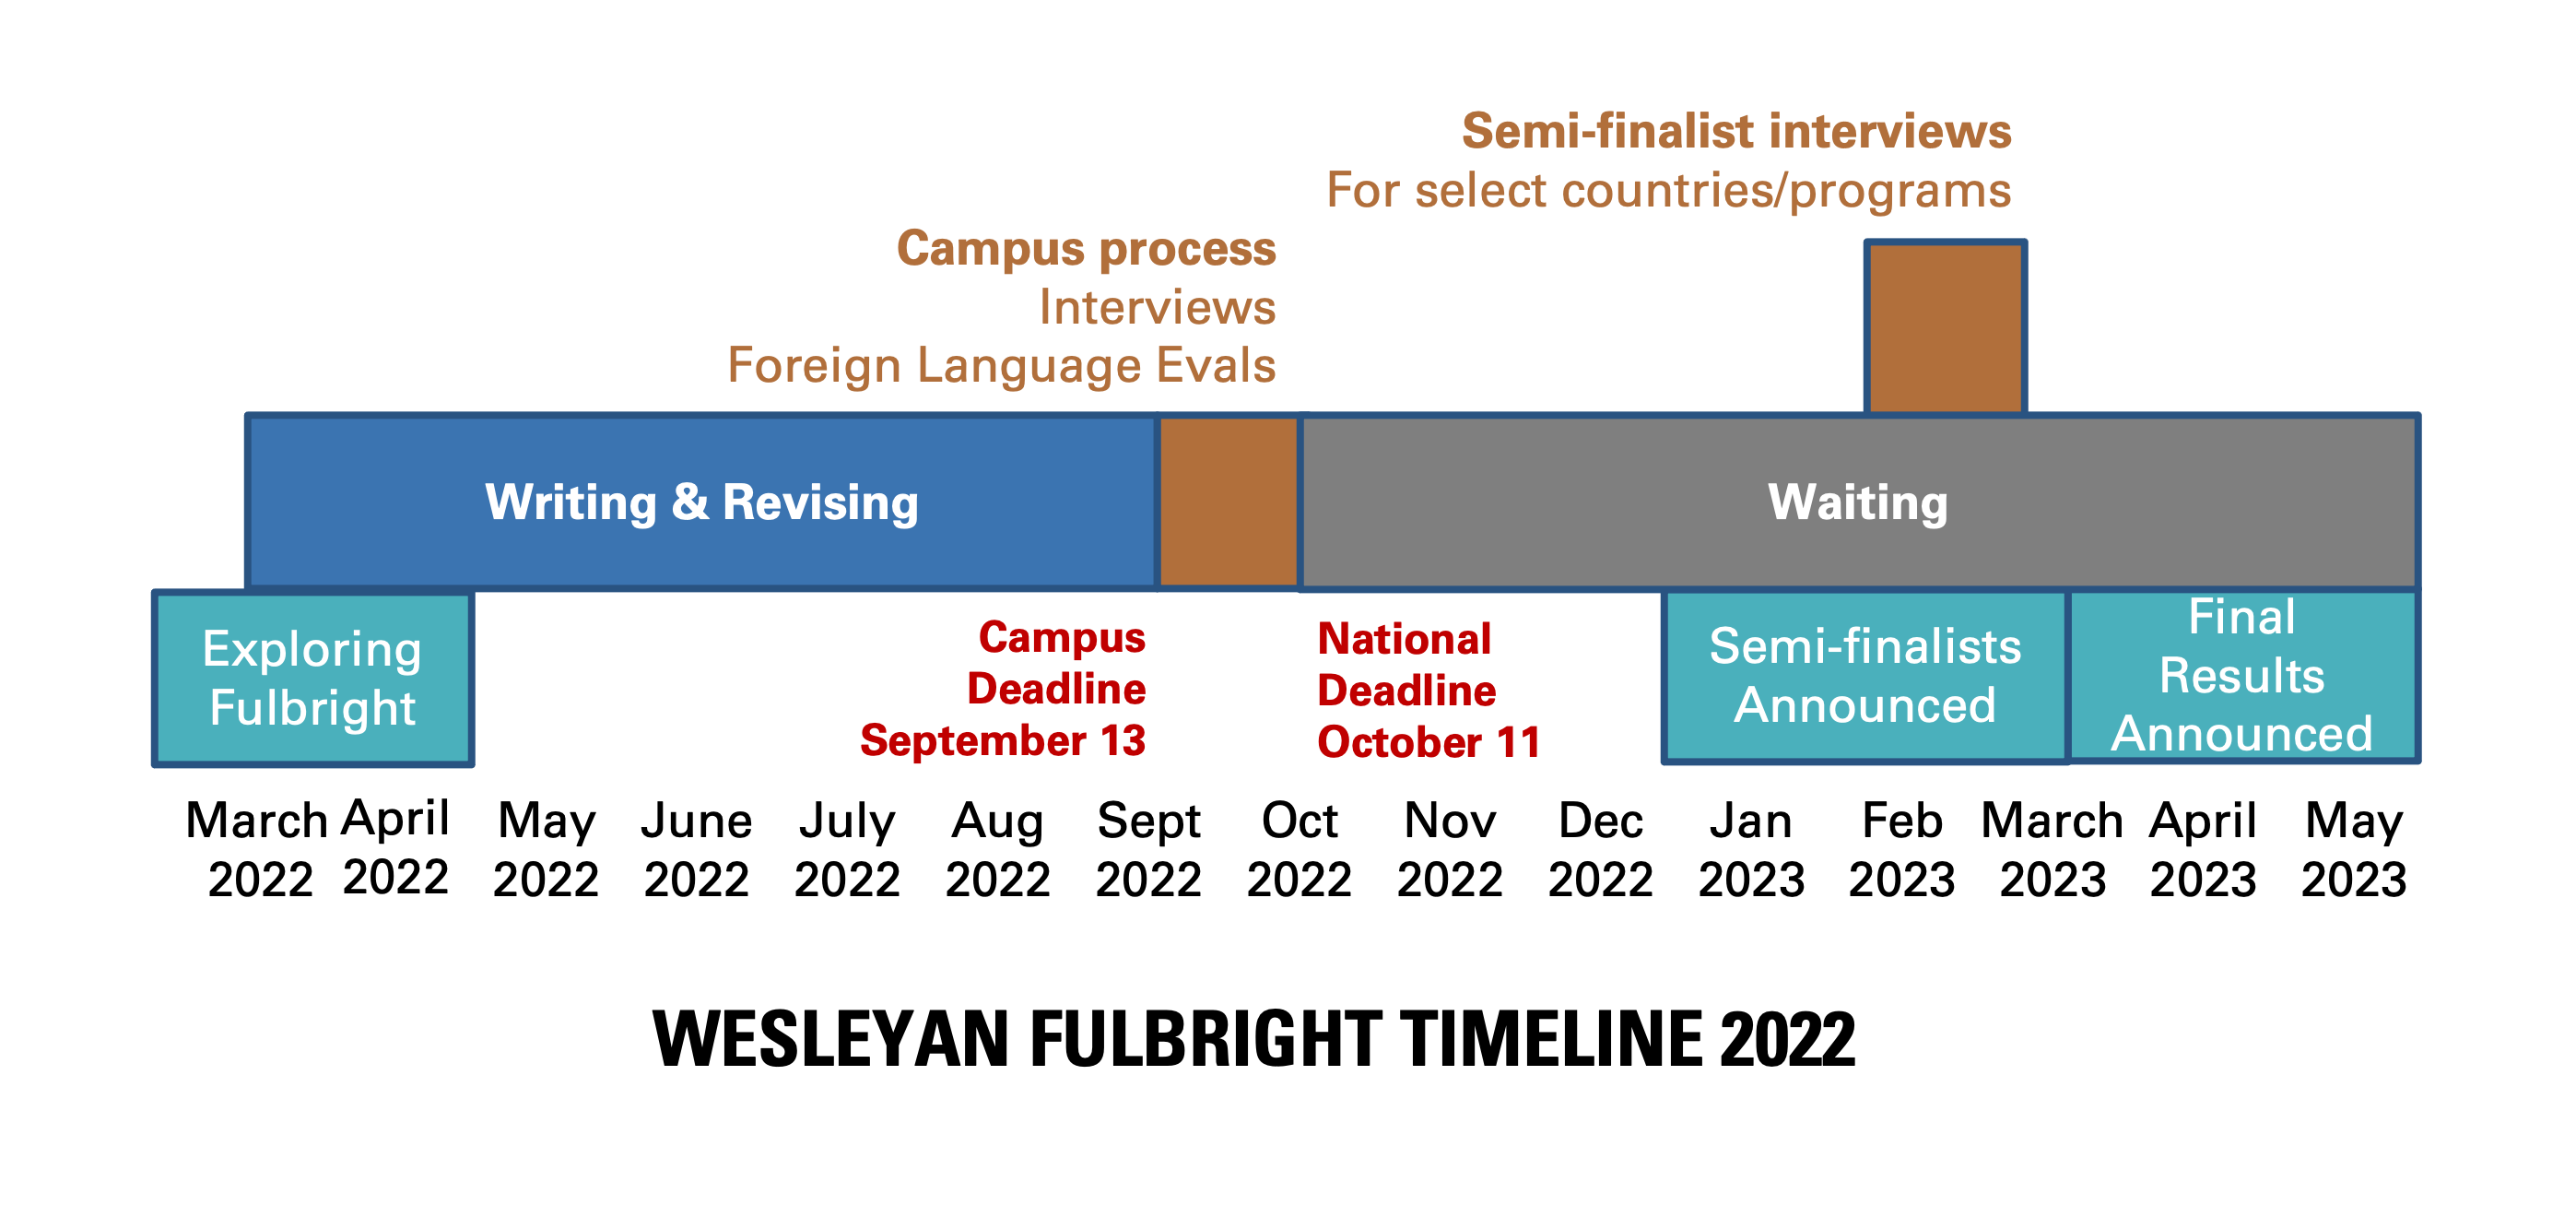 TImeline for applying to Fulbright, starting with exploring in April/May, writing & Revising in June to September, campus deadline in September, and National deadline in October. Then semifinalist announcements in January and finalist announcements February through May.